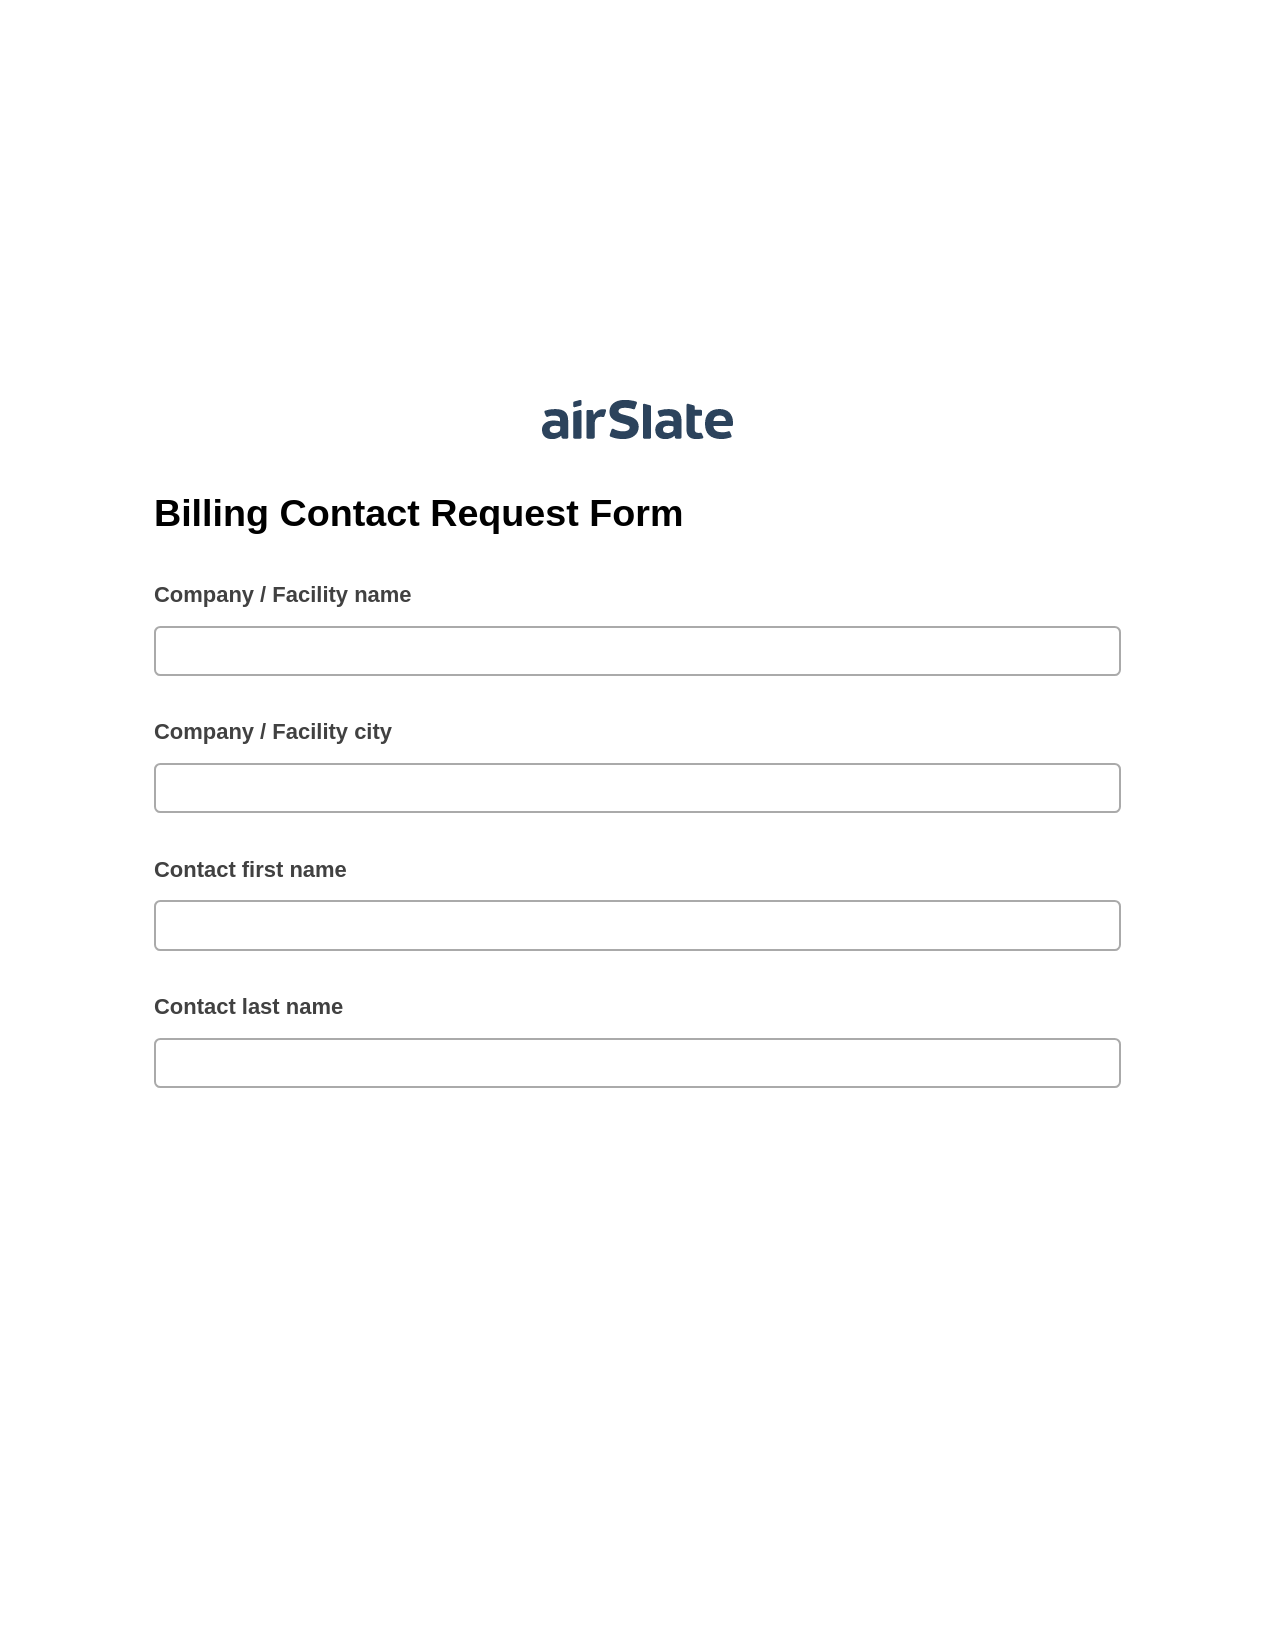 Multirole Billing Contact Request Form Pre-fill from Google Sheets Bot, Unassign Role Bot, Export to Salesforce Bot